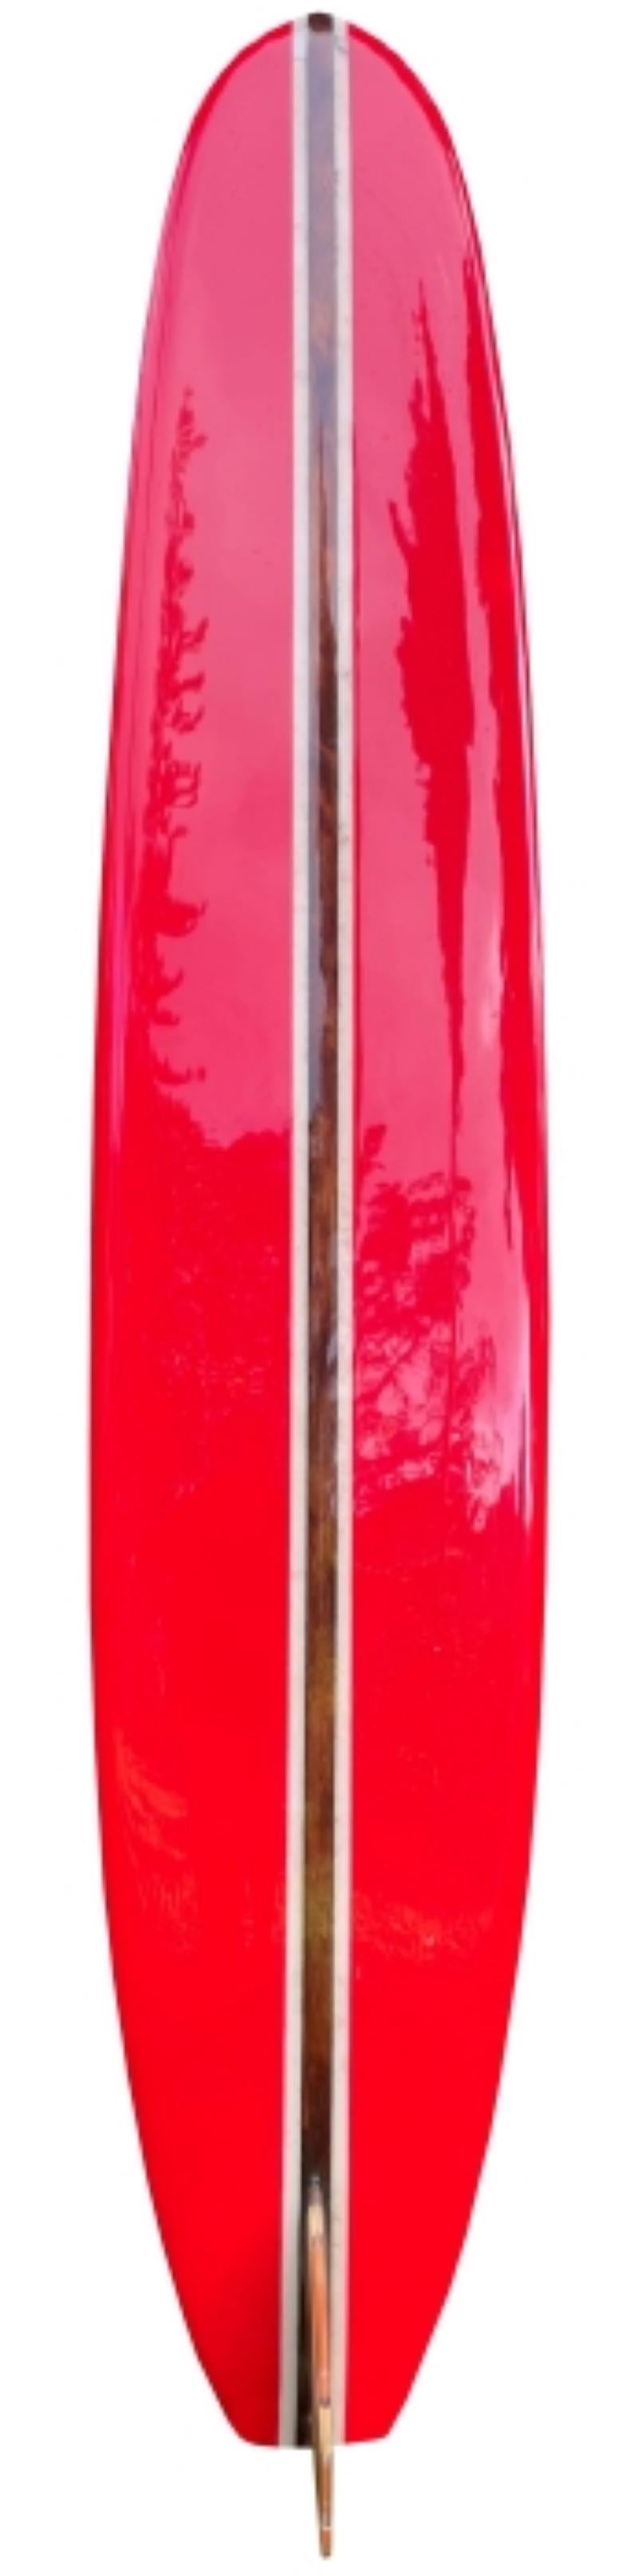 Mid-1960s Duke Kahanamoku Hawaiian style 9’9 classic longboard made in the mid 1960s. Features attractive red panels, single wood stringer design, and stunning 17 piece redwood/balsa wood fin. A fantastic example of a 1960s vintage longboard bearing